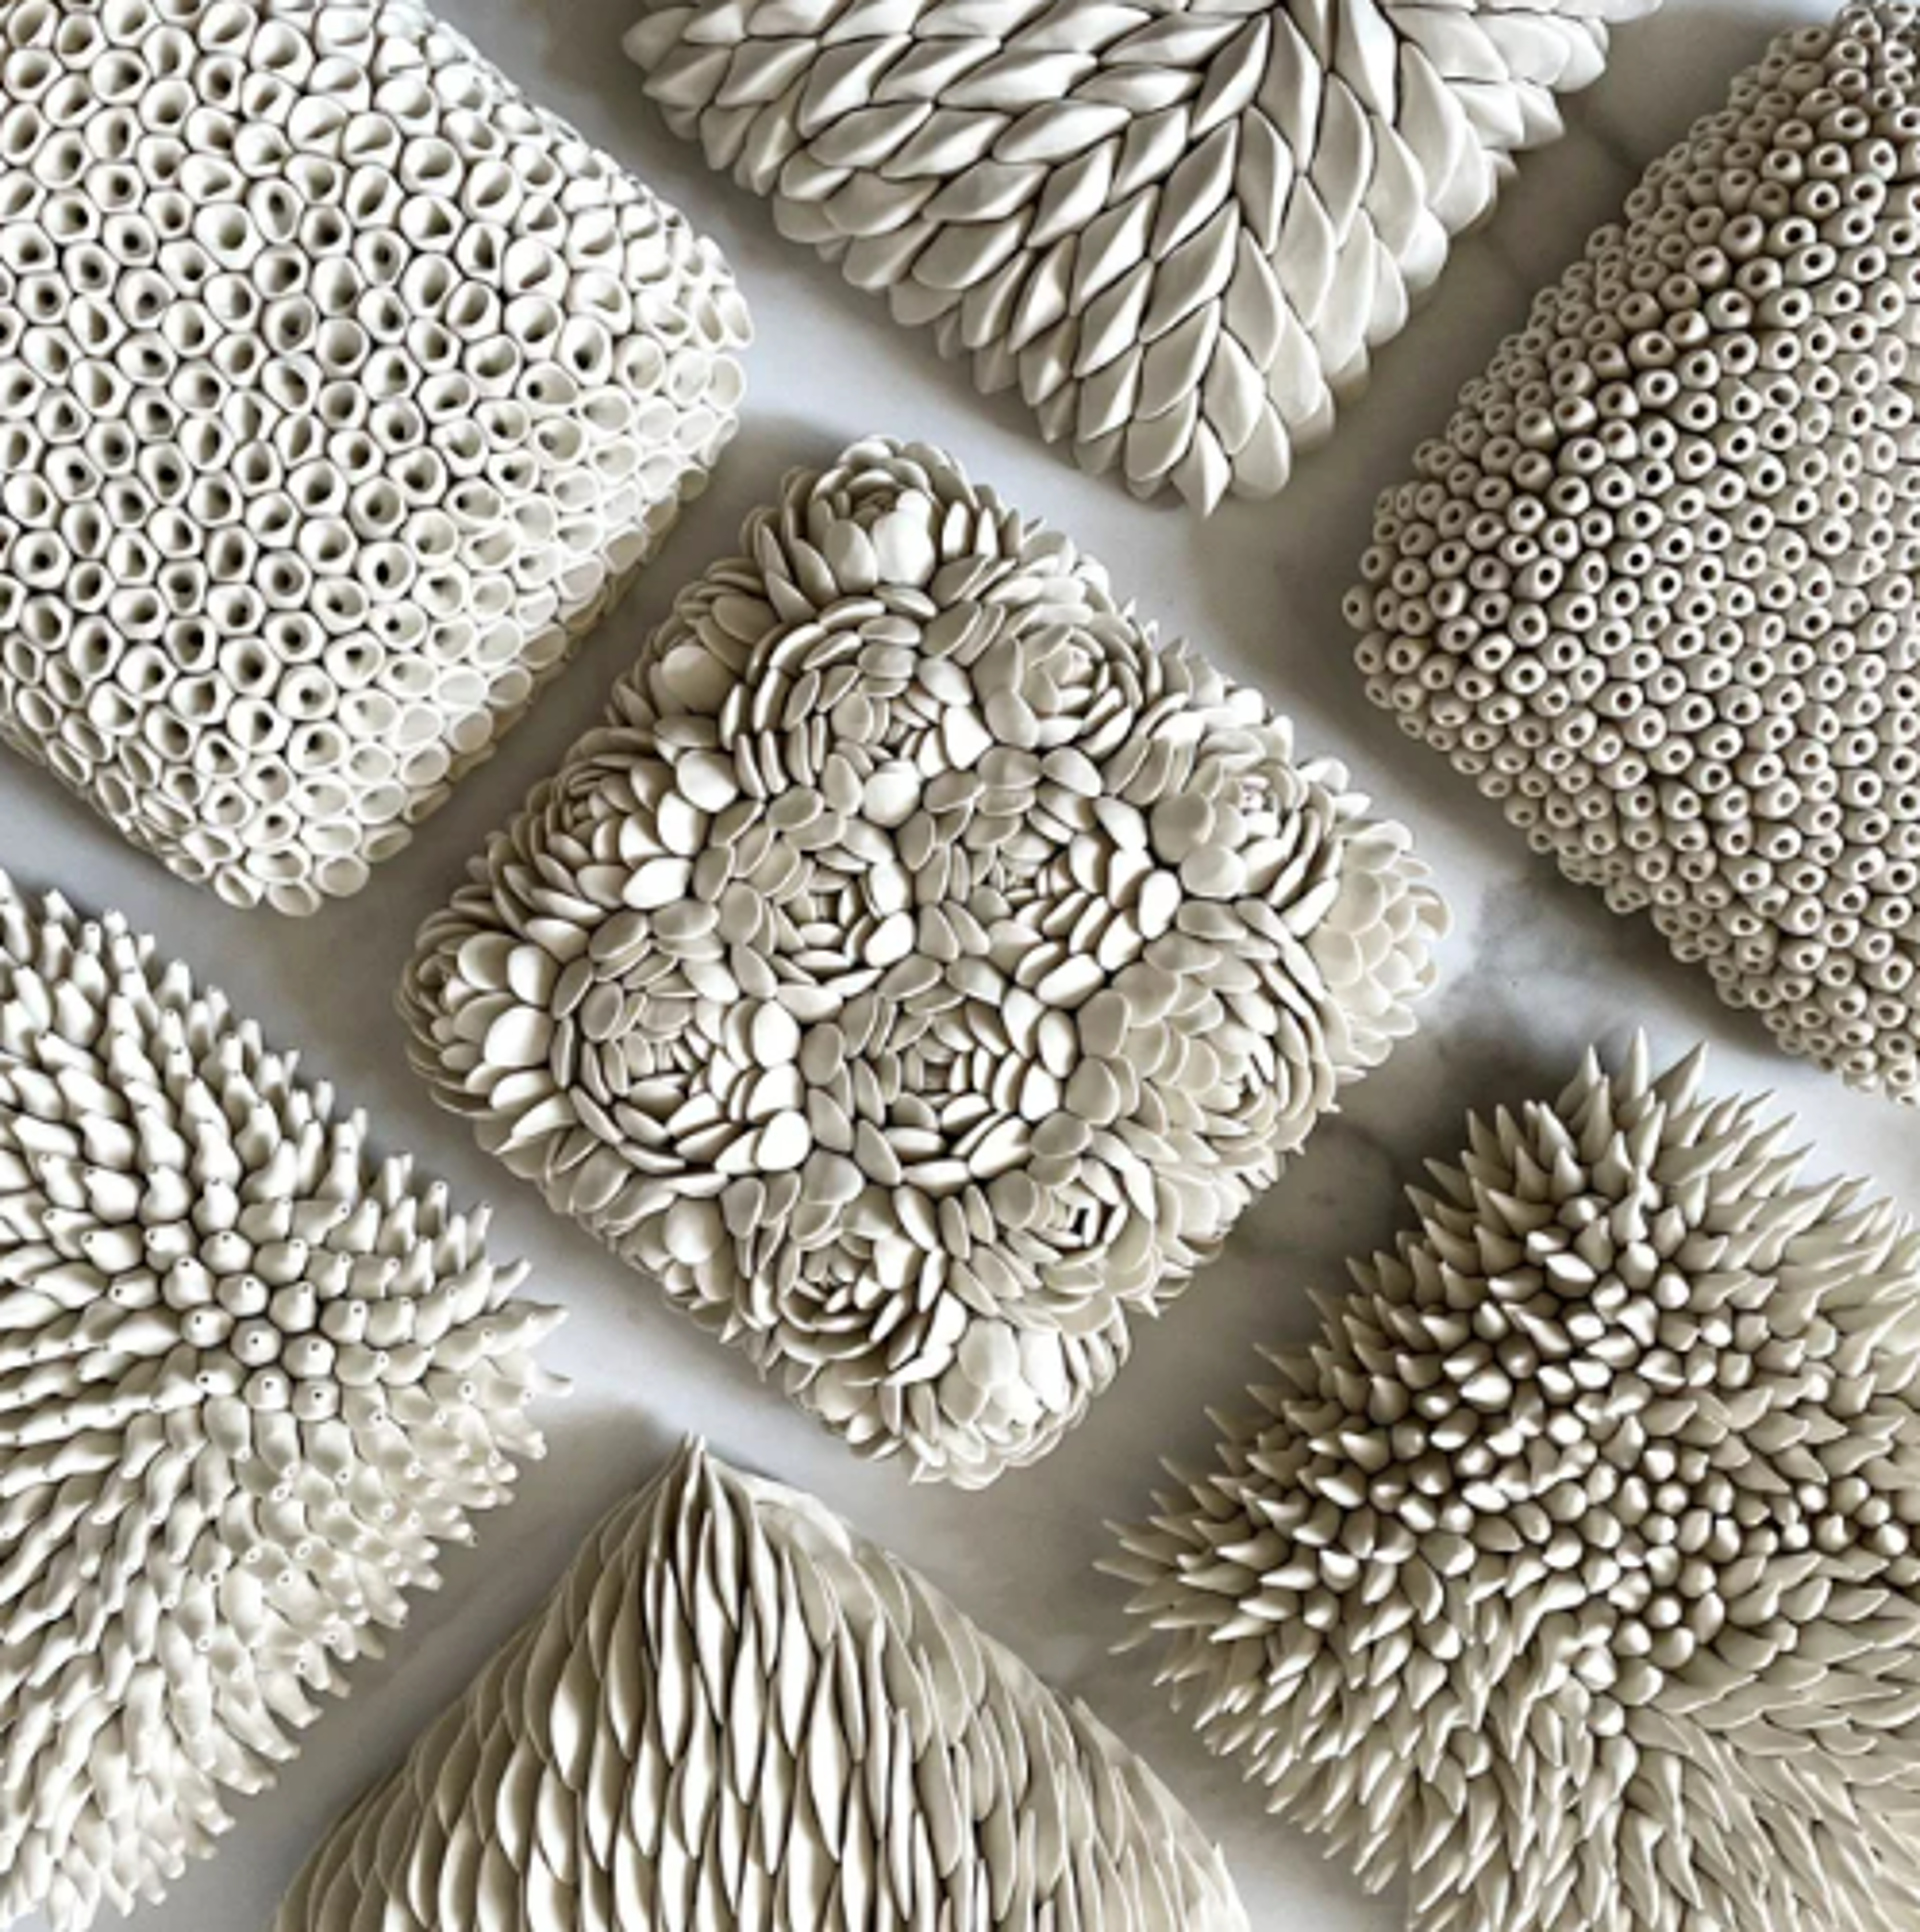 Jade Wall Tile in White by Heather Knight